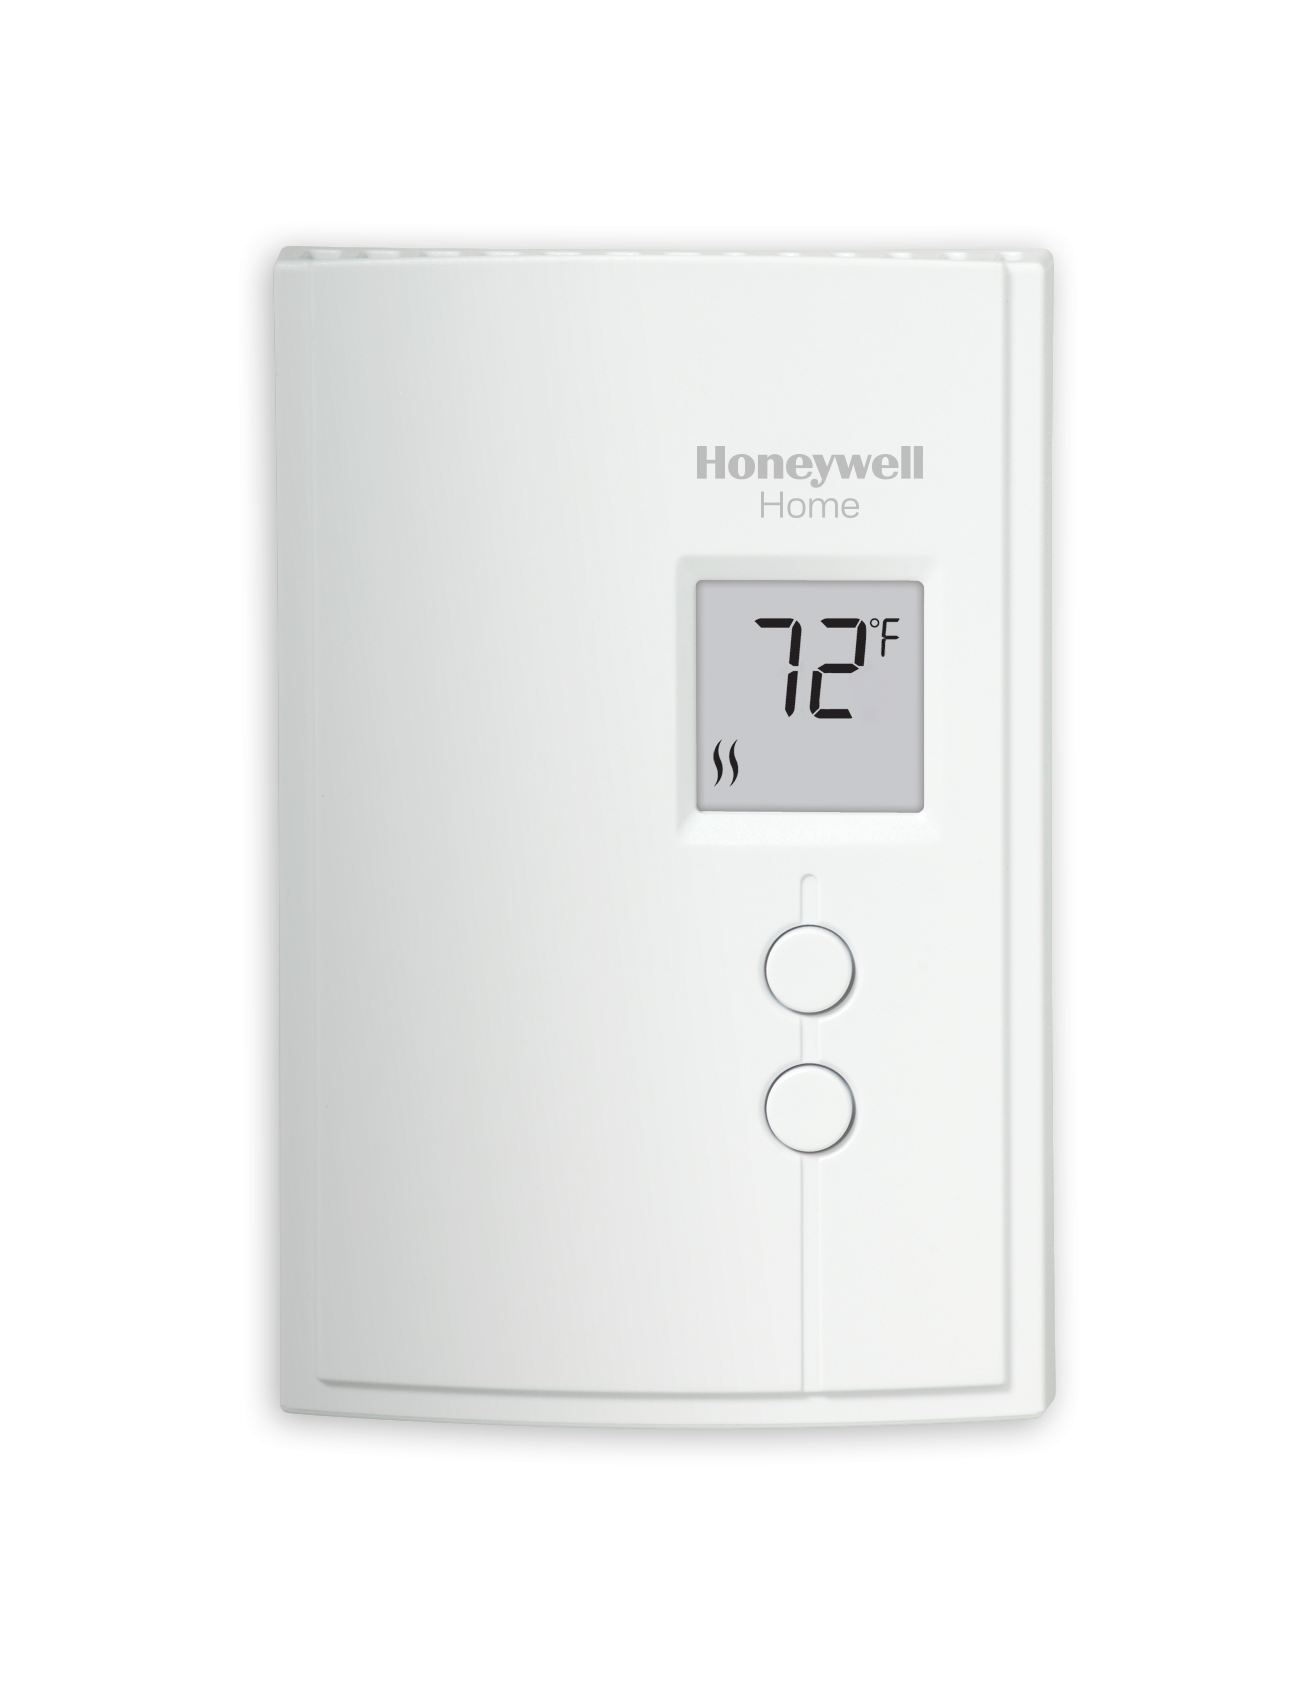 Honeywell Home RTH221B 24-Volt Basic Schedule Programmable Thermostat